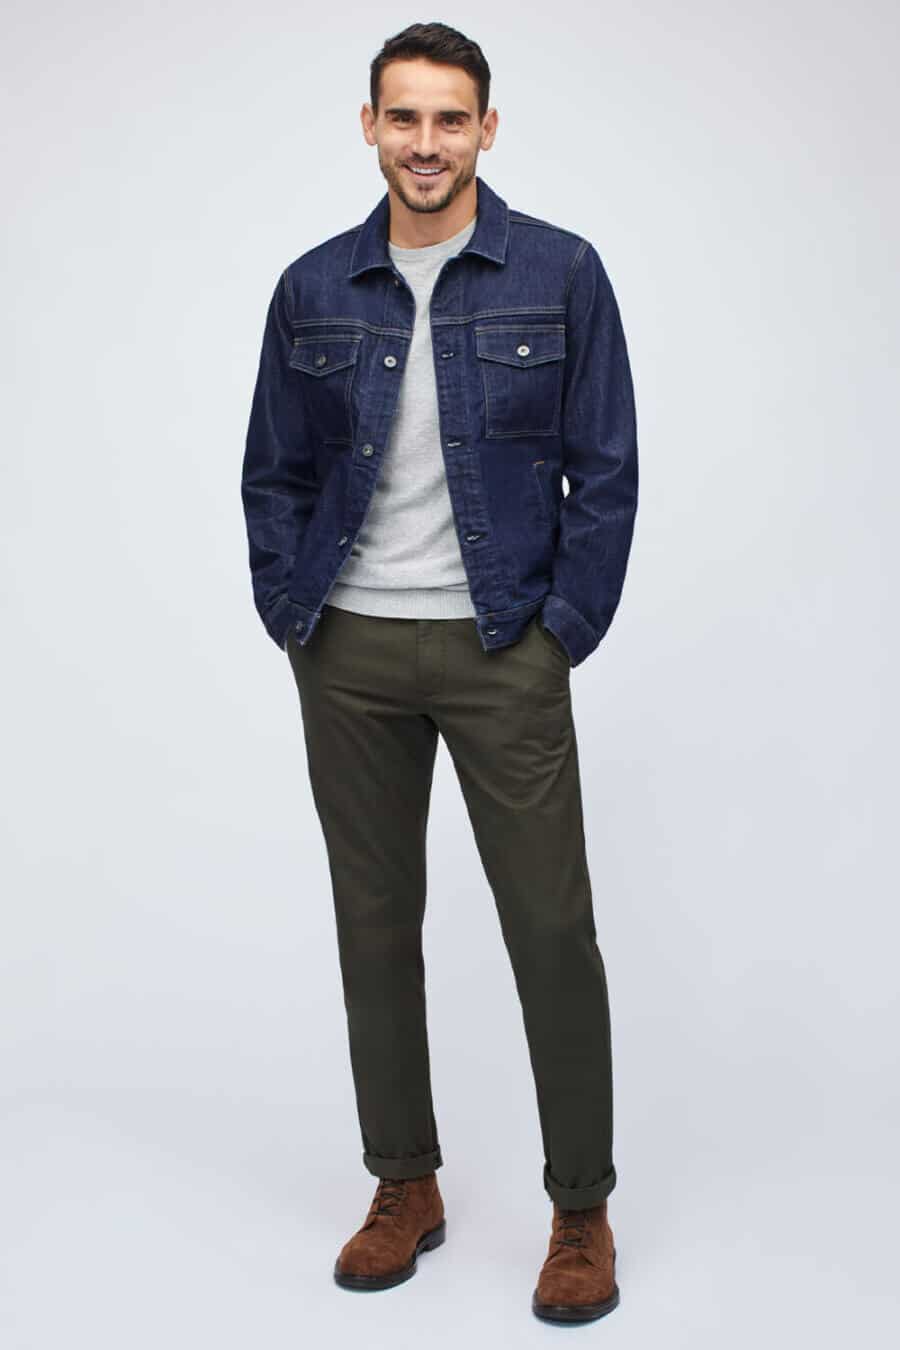 Smart casual jean jacket outfit for men with chinos and suede boots